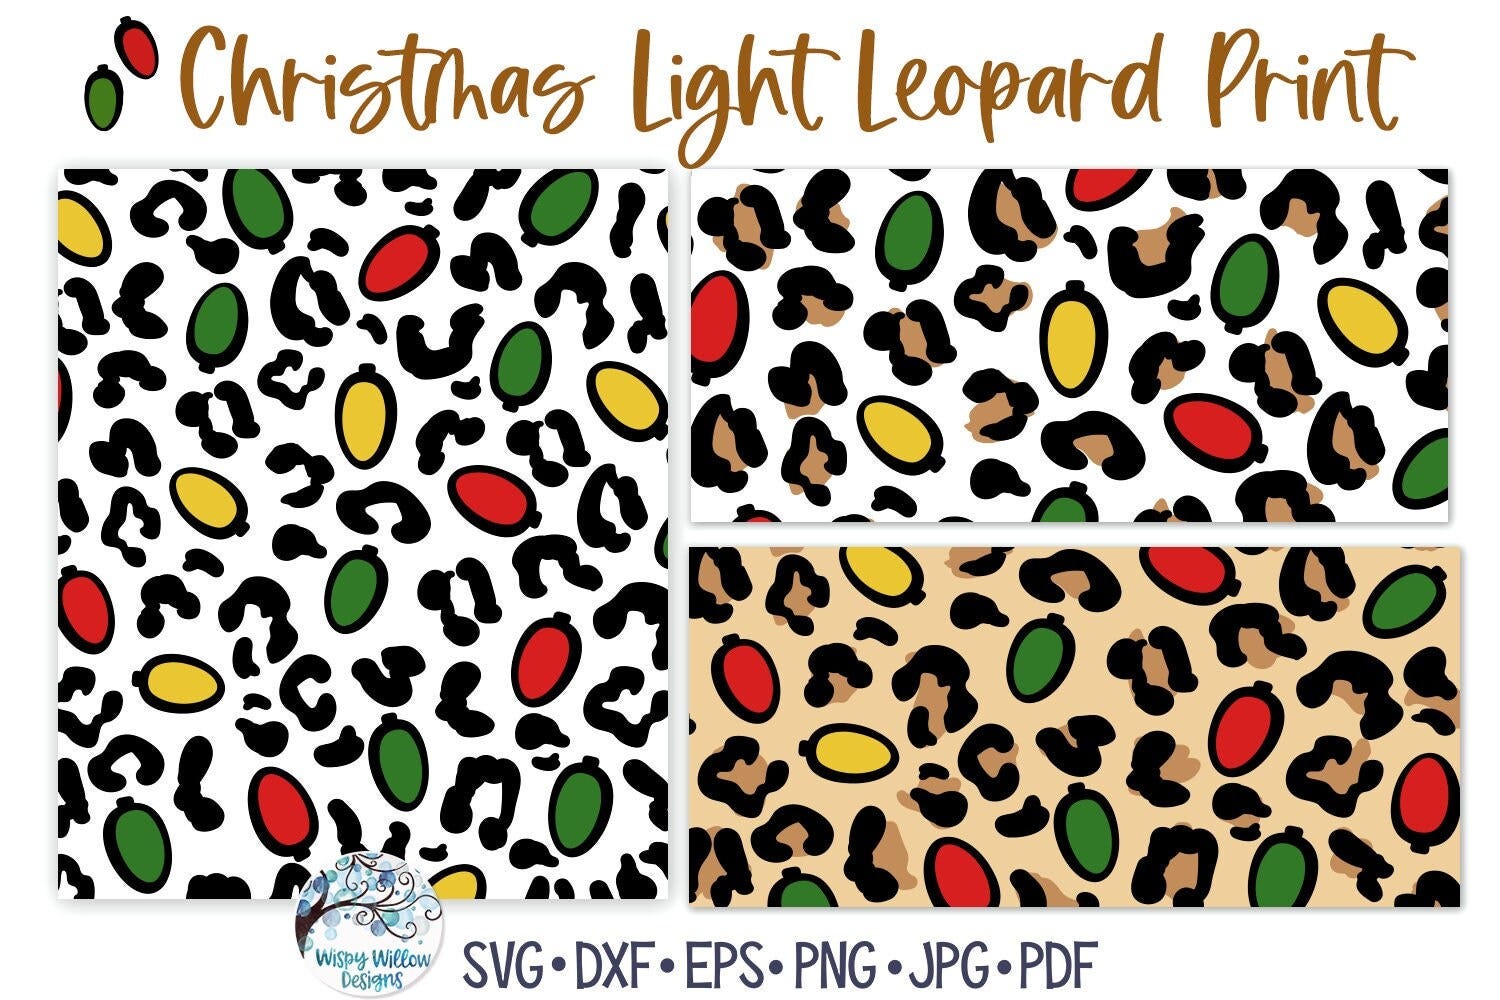 Christmas Light Leopard Print SVG Bundle for Cricut, Winter Holiday Animal Print PNG, Cheetah Print Pattern, Vinyl Decal File for Silhouette